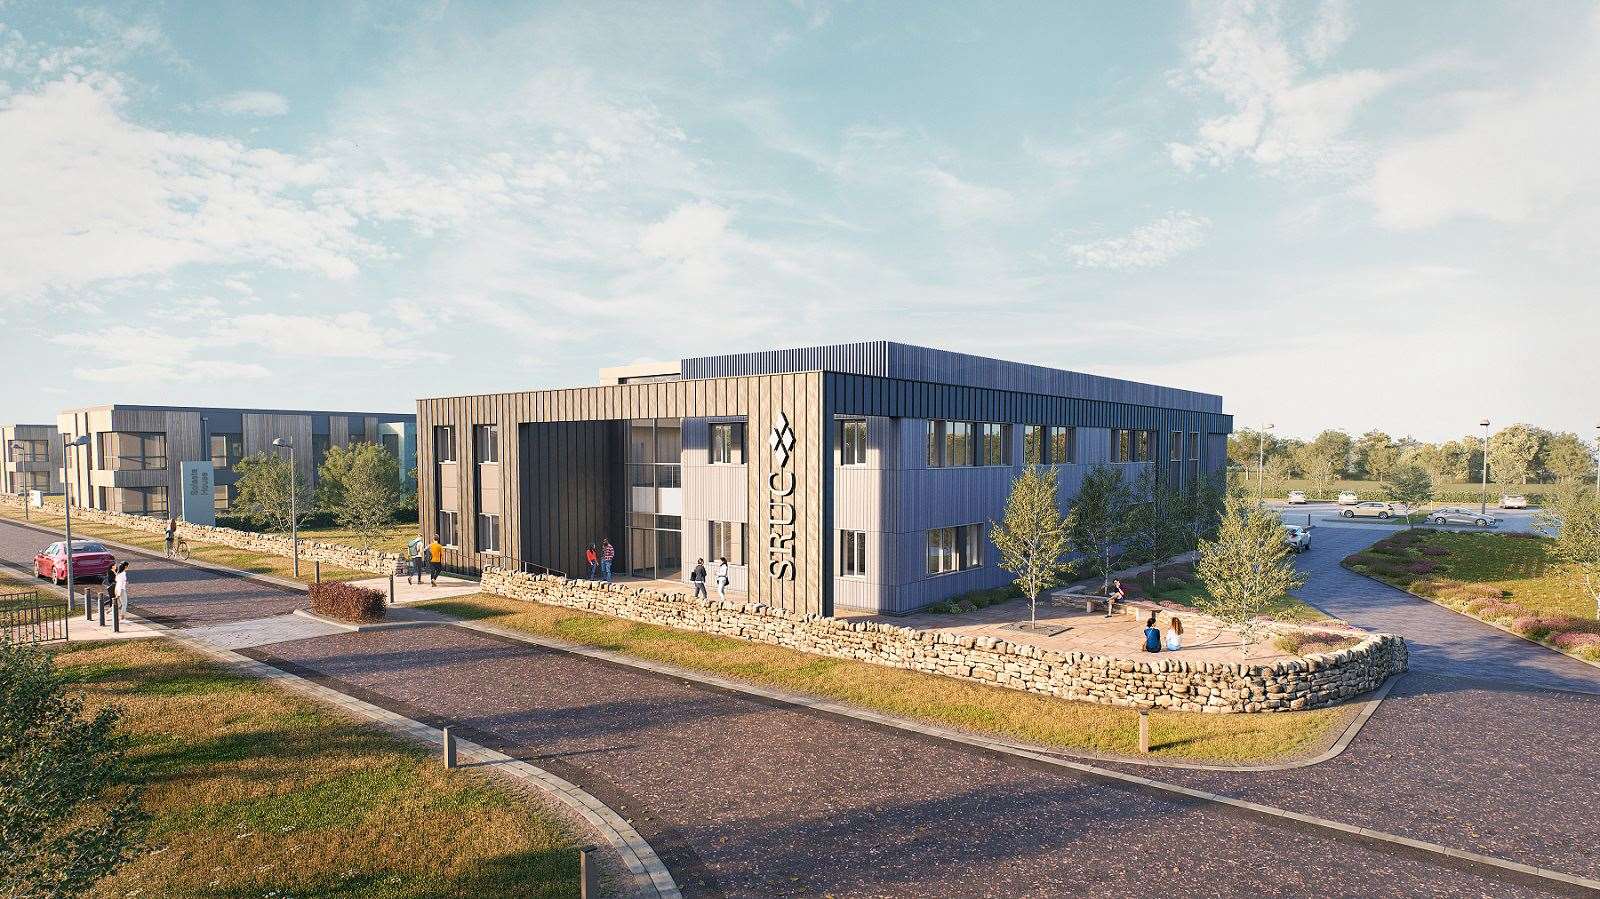 Businesses and entrepreneurs are being sought to take up residence in the Rural and Veterinary Innovation Centre.